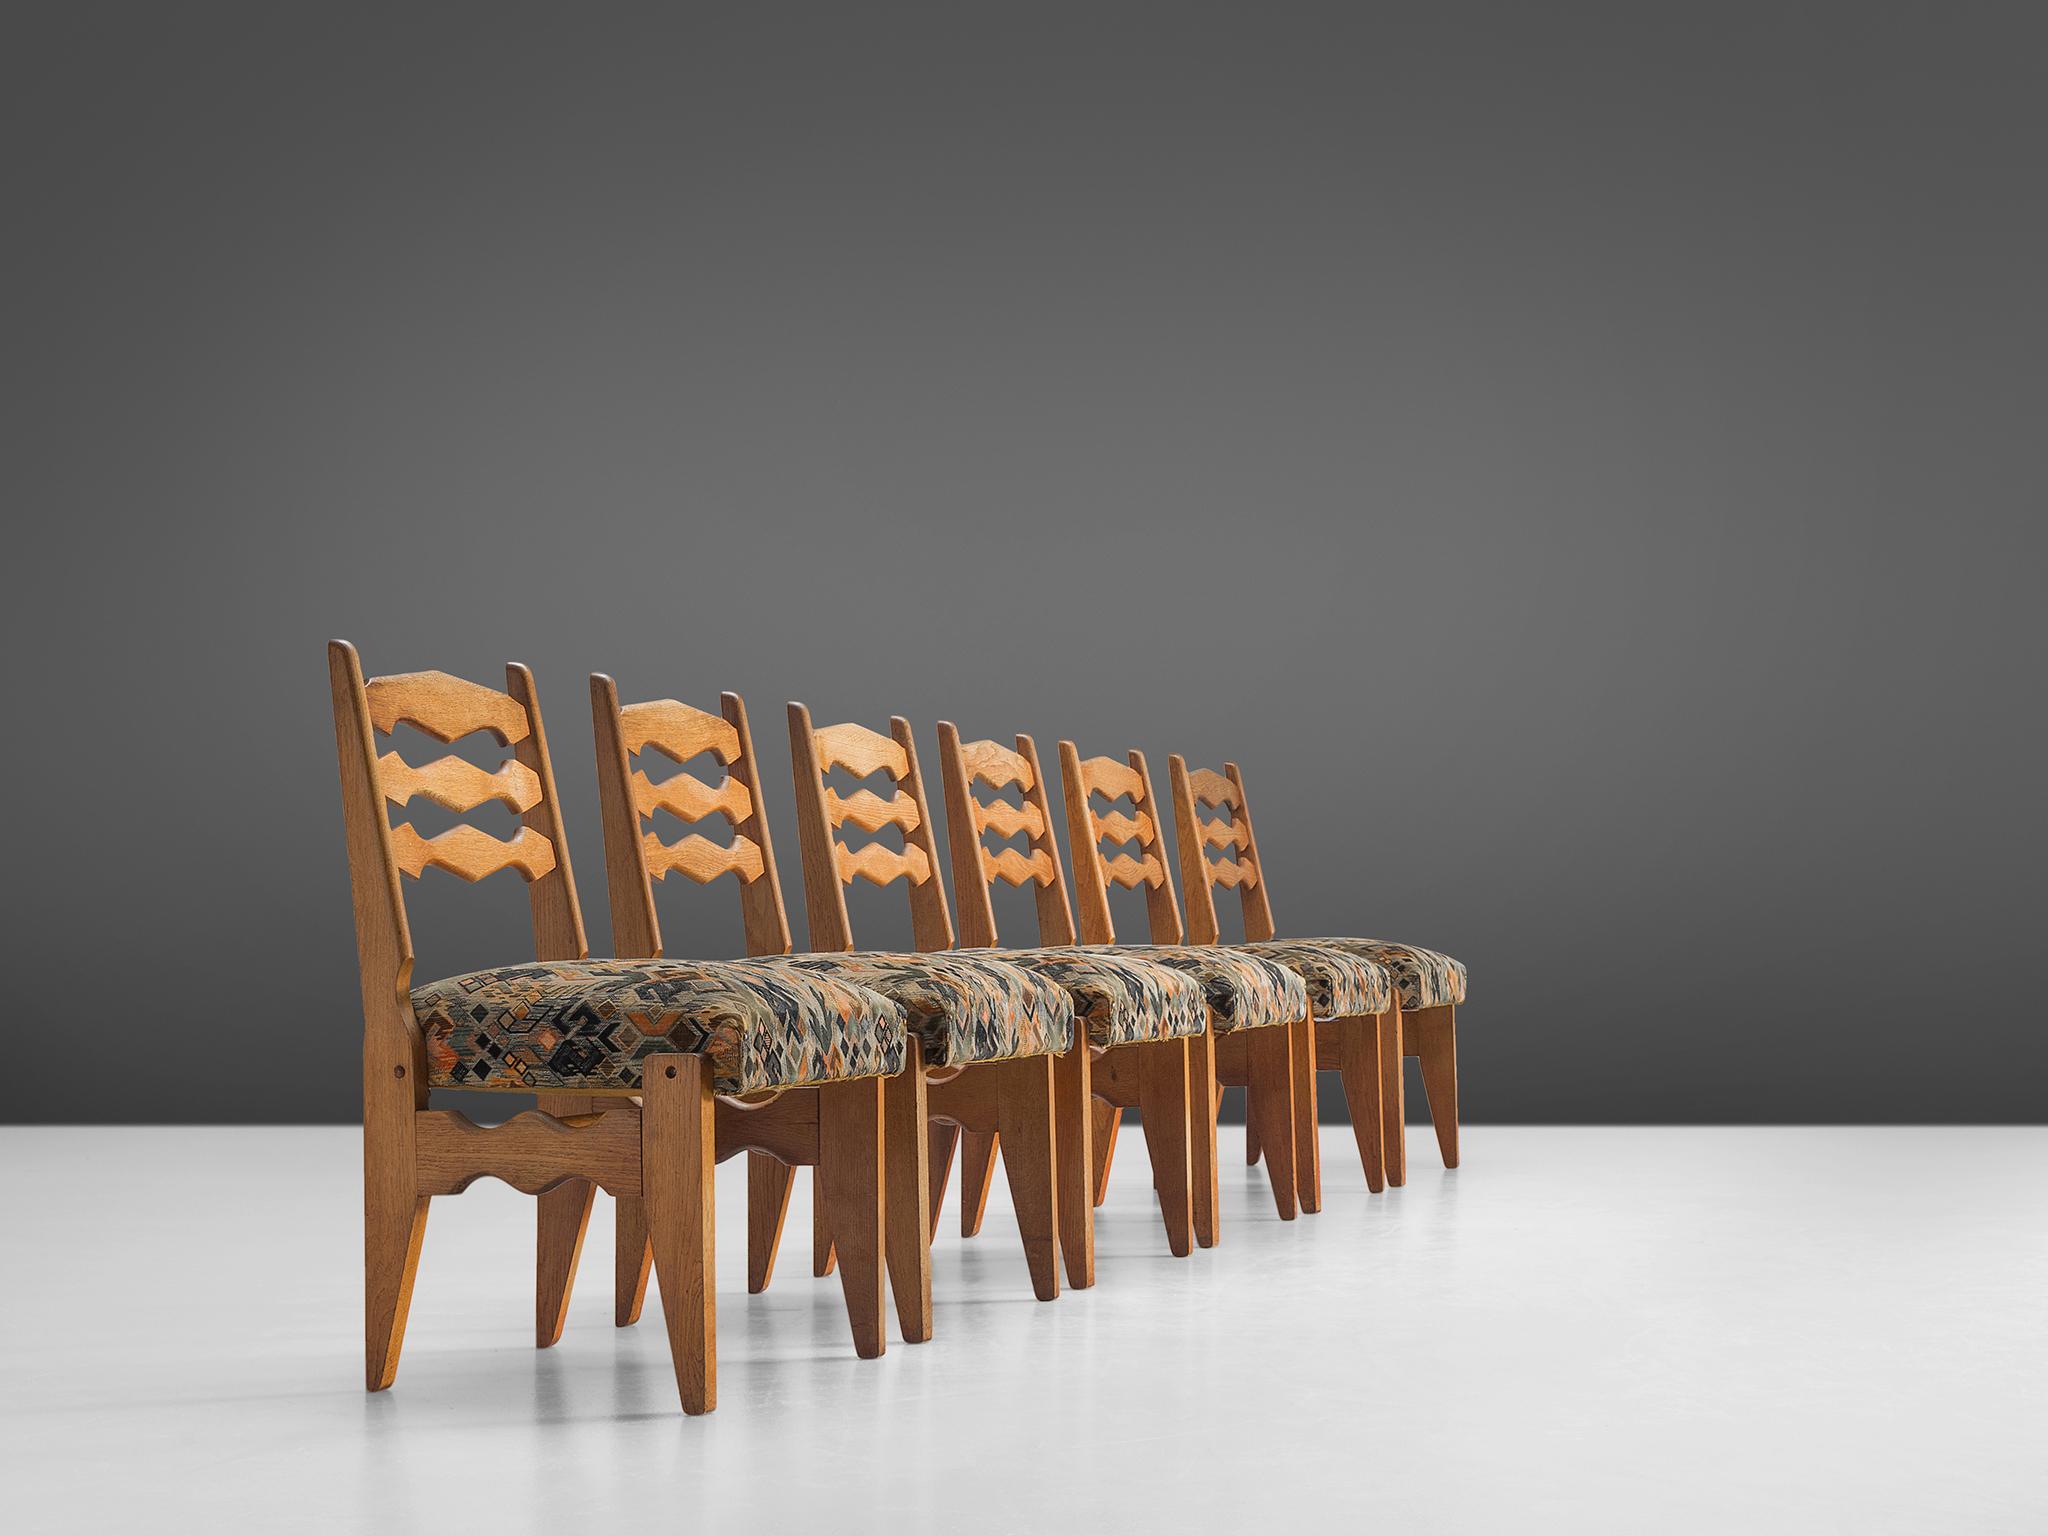 Set of six dining chairs, in oak and patterned fabric, by Guillerme & Chambron, France, 1960s.

Set of six sturdy, decorative dining chairs in solid oak by Guillerme and Chambron. These chairs show a few characteristics of this French designer